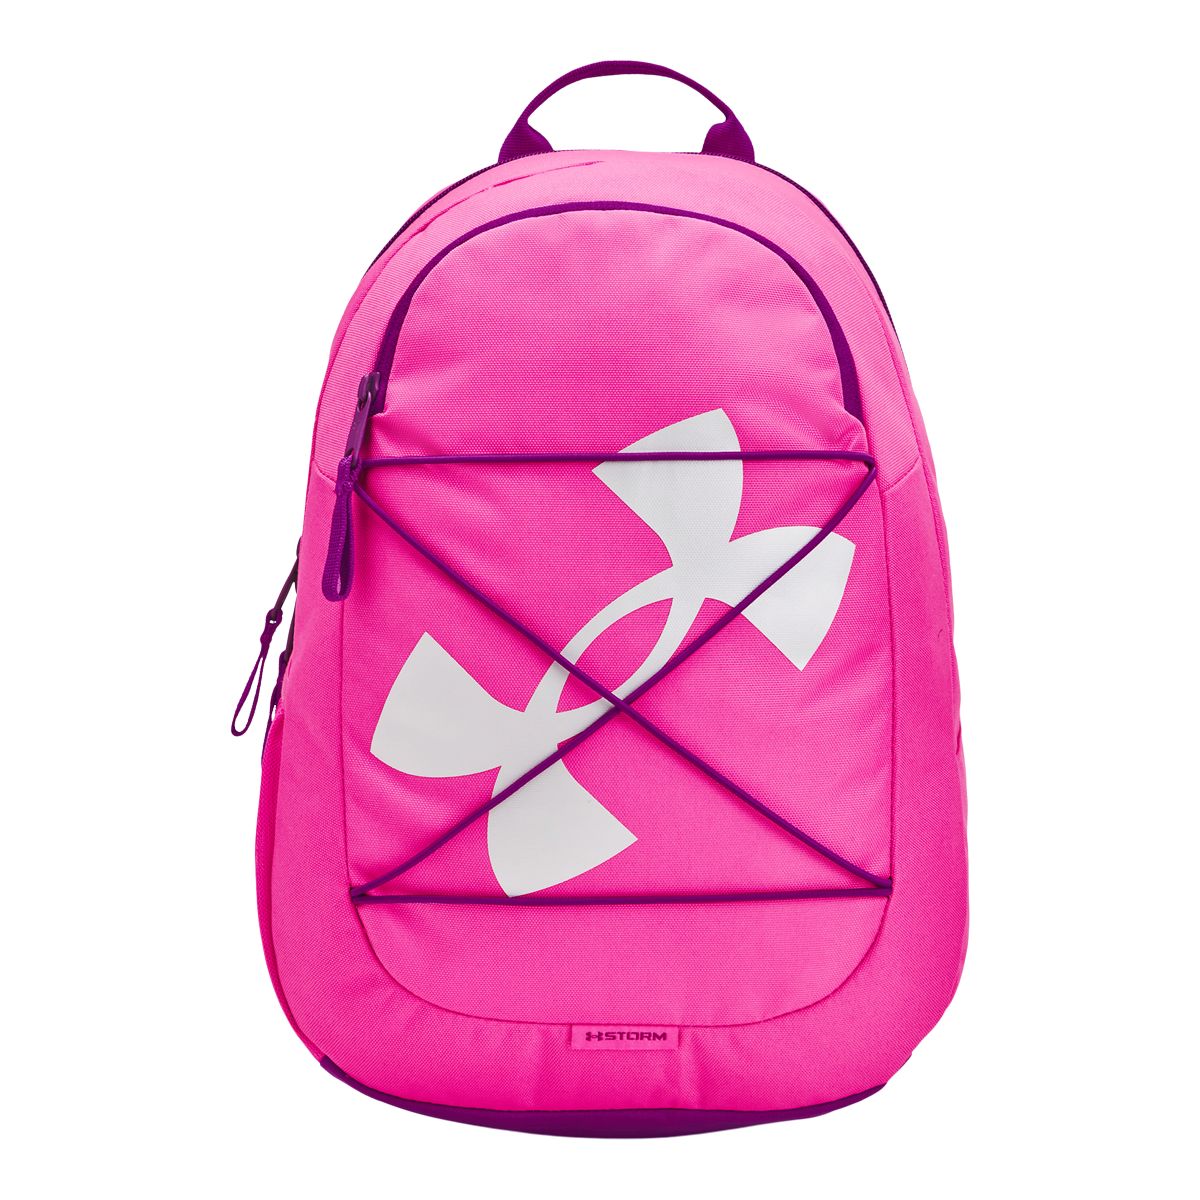 Under Armour Girls' Hustle Play Backpack